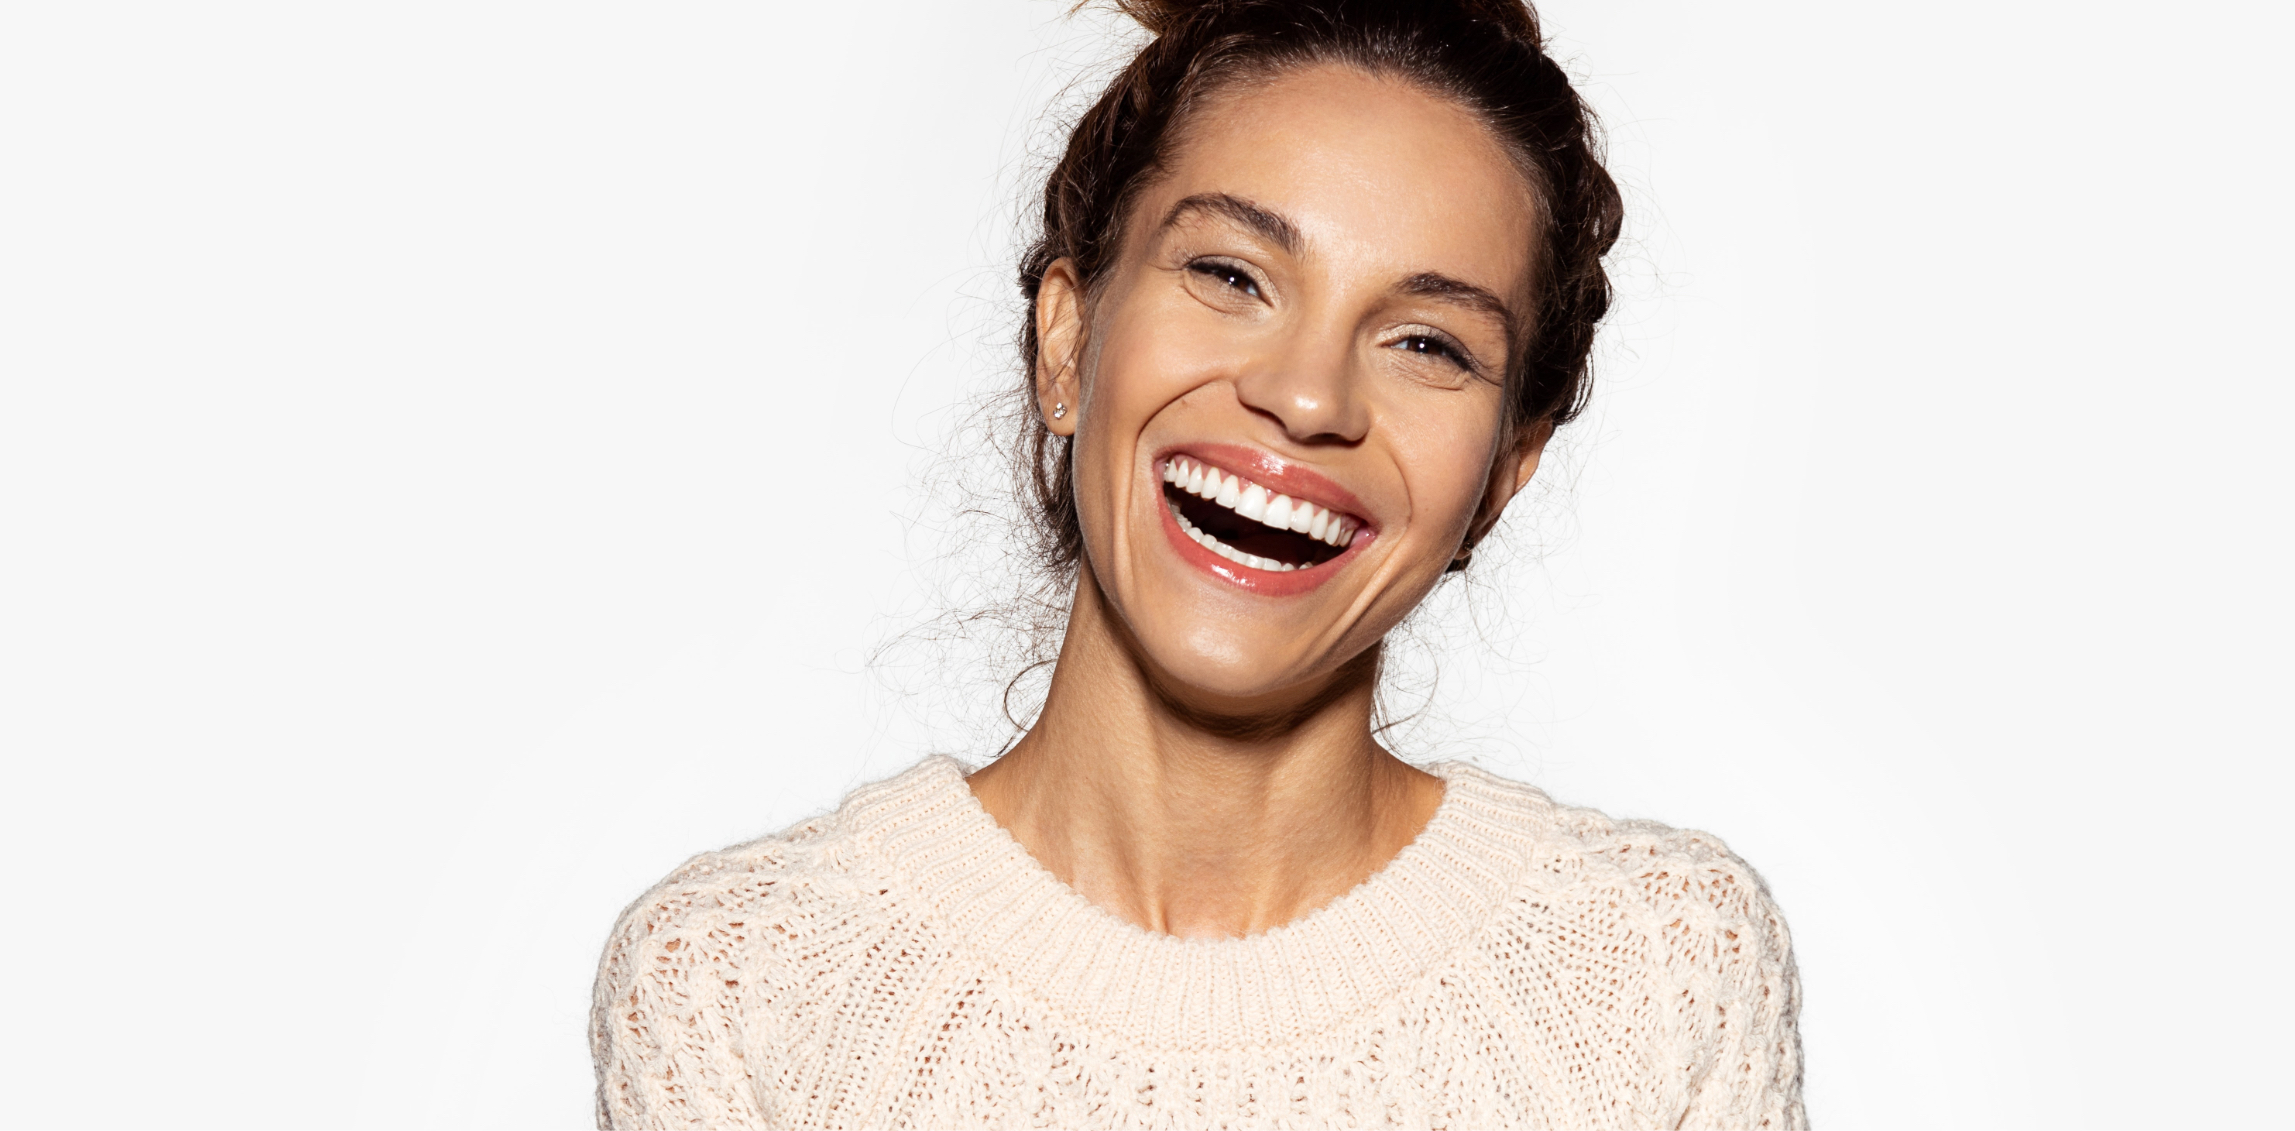 Happy woman in a white sweater